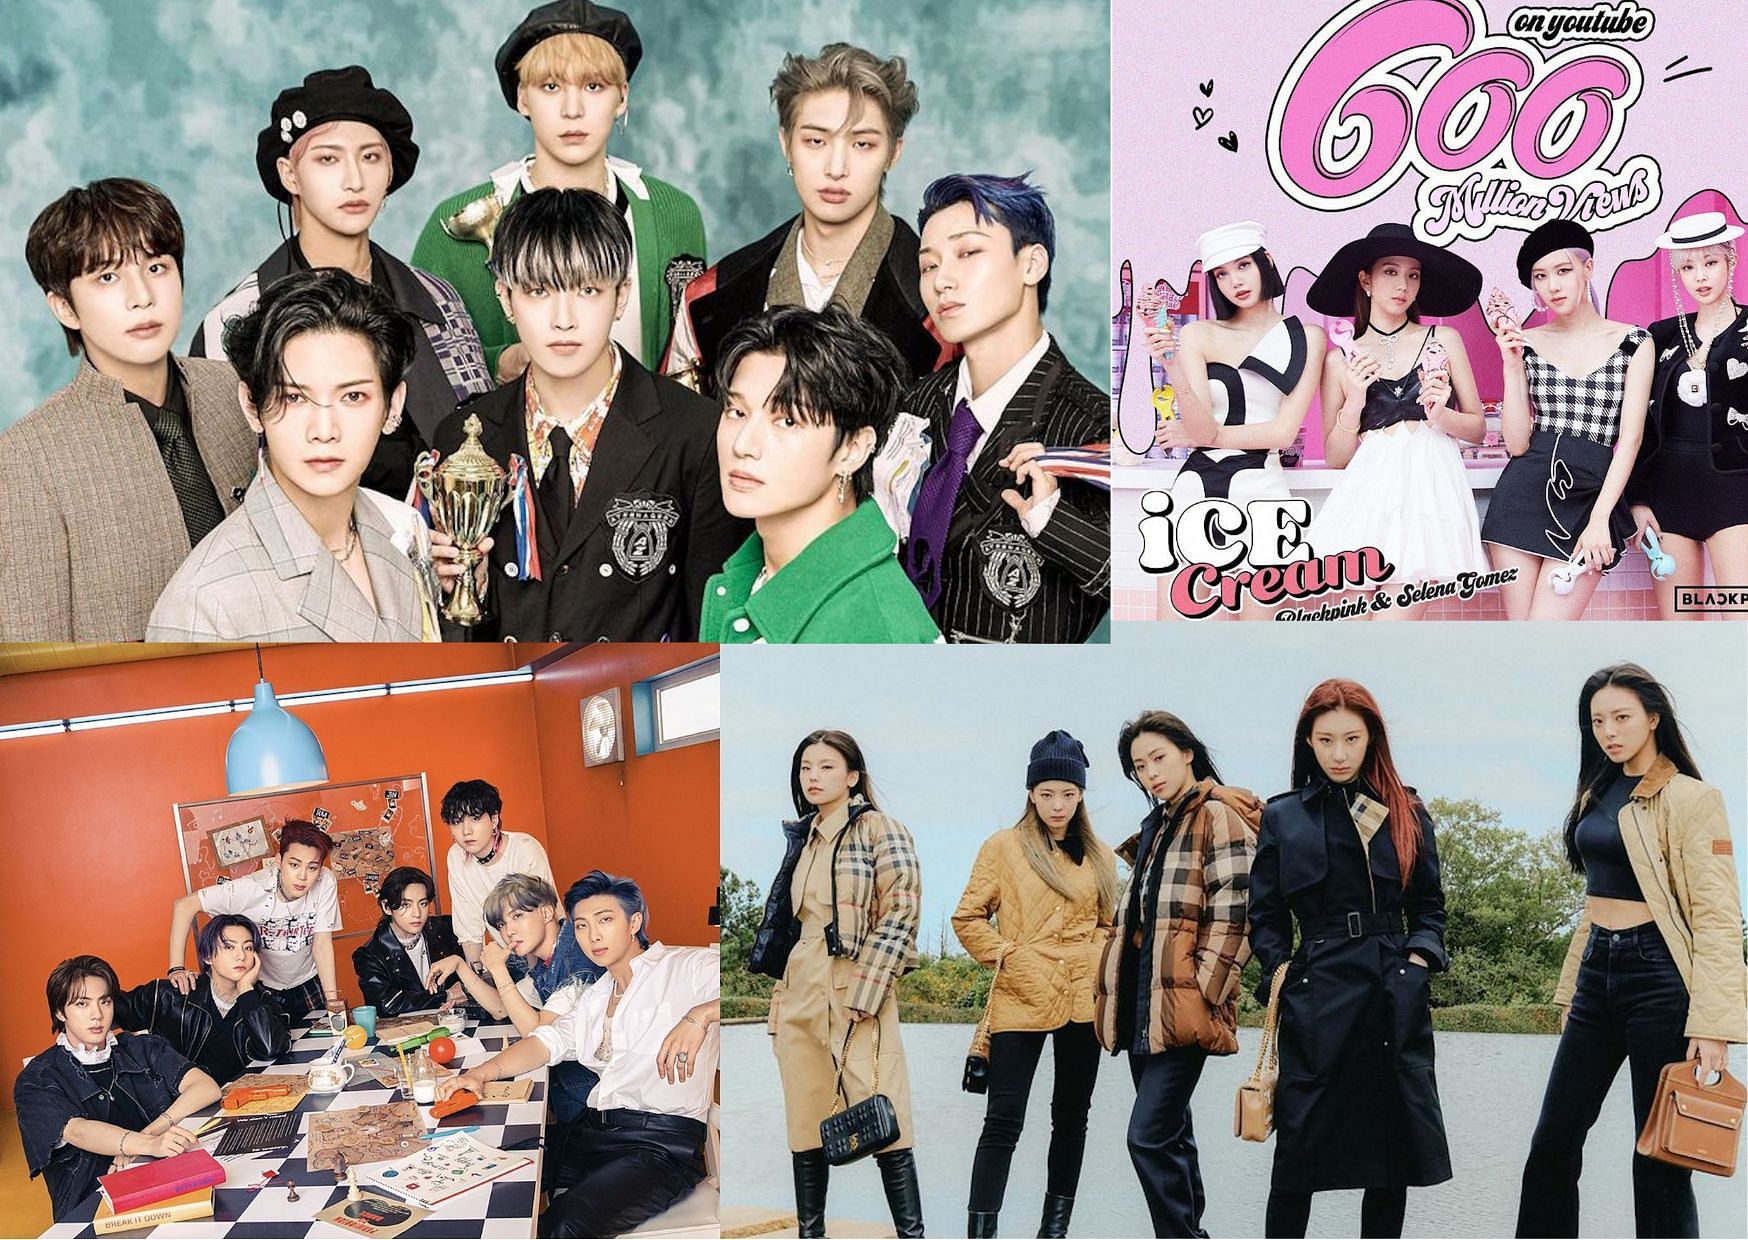 K-Pop bands BTS, BLACKPINK, ATEEZ, ITZY. (Images via Instagram/@bts.bighitofficial/@ateez_official_/@blackpinkofficial/@itzy.all.in.us)